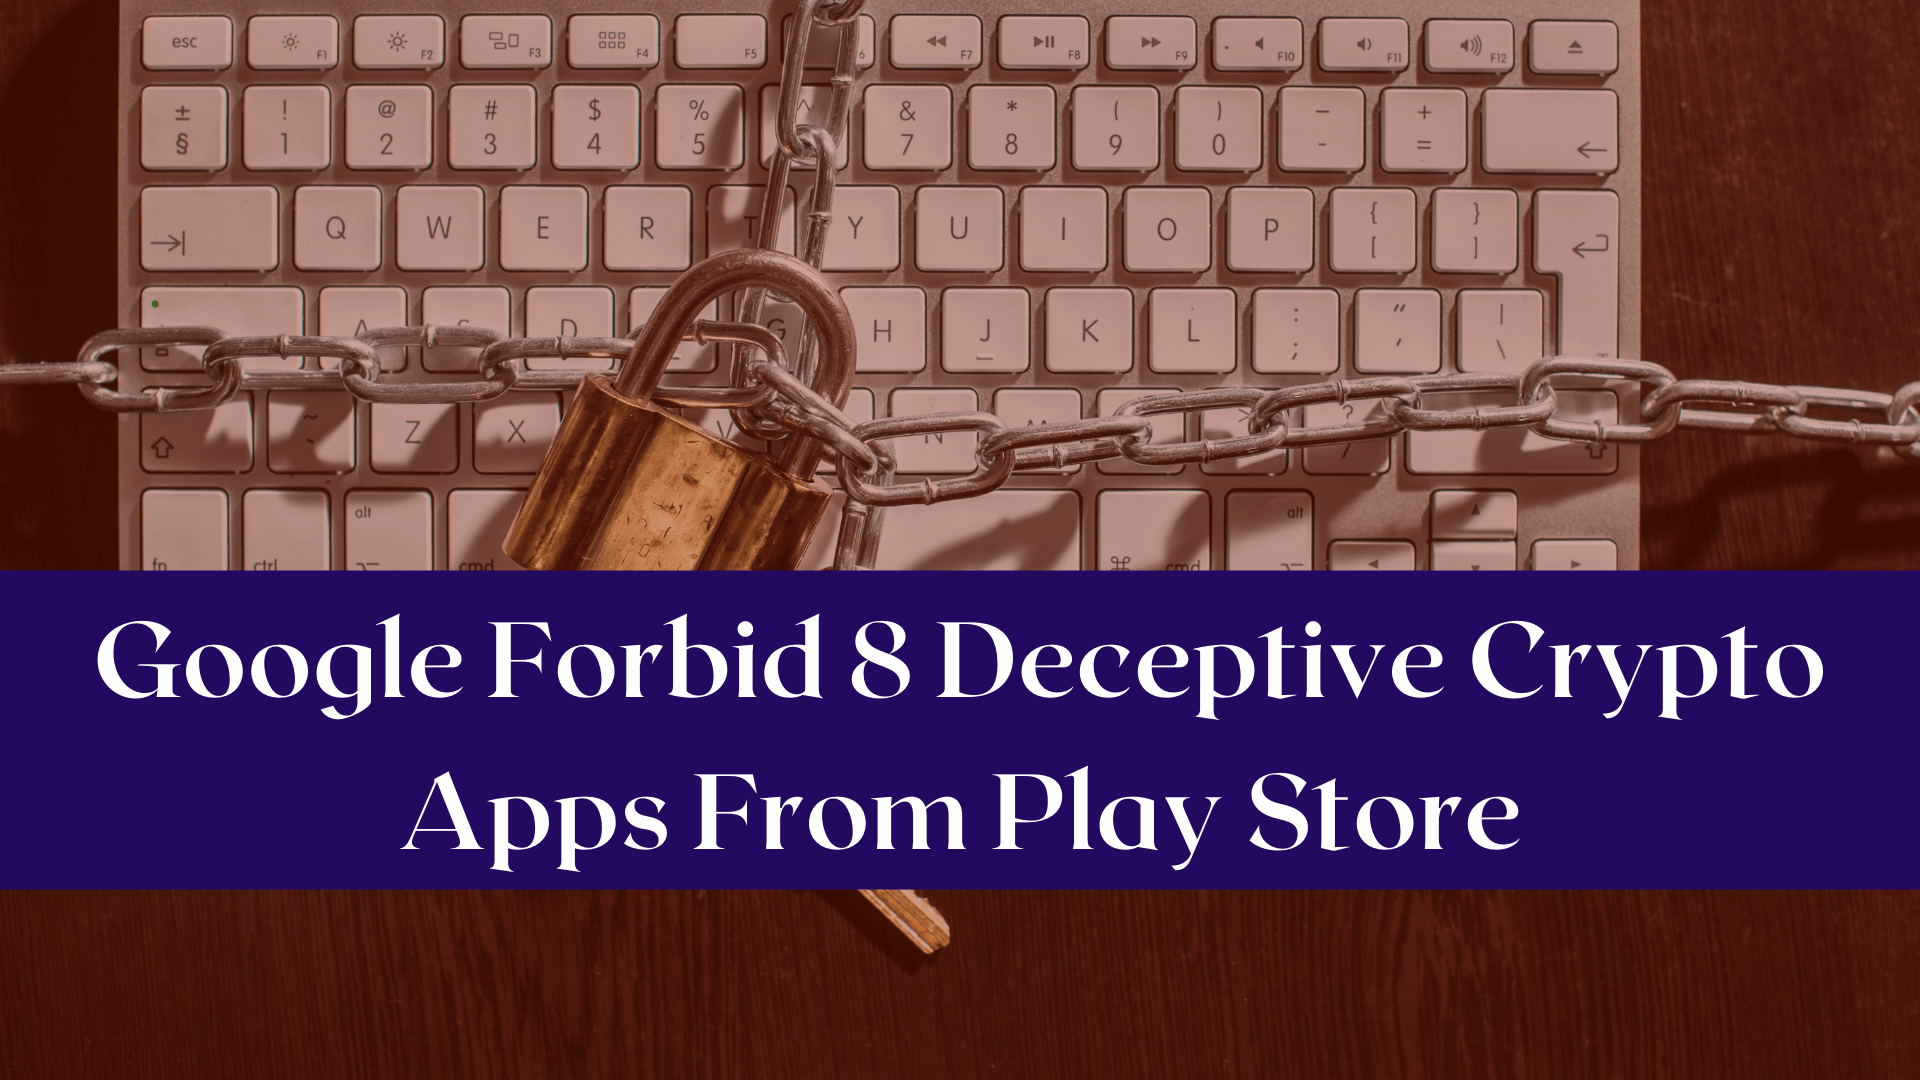 Google Forbit 8 Deceptive Crypto Apps From Play Store